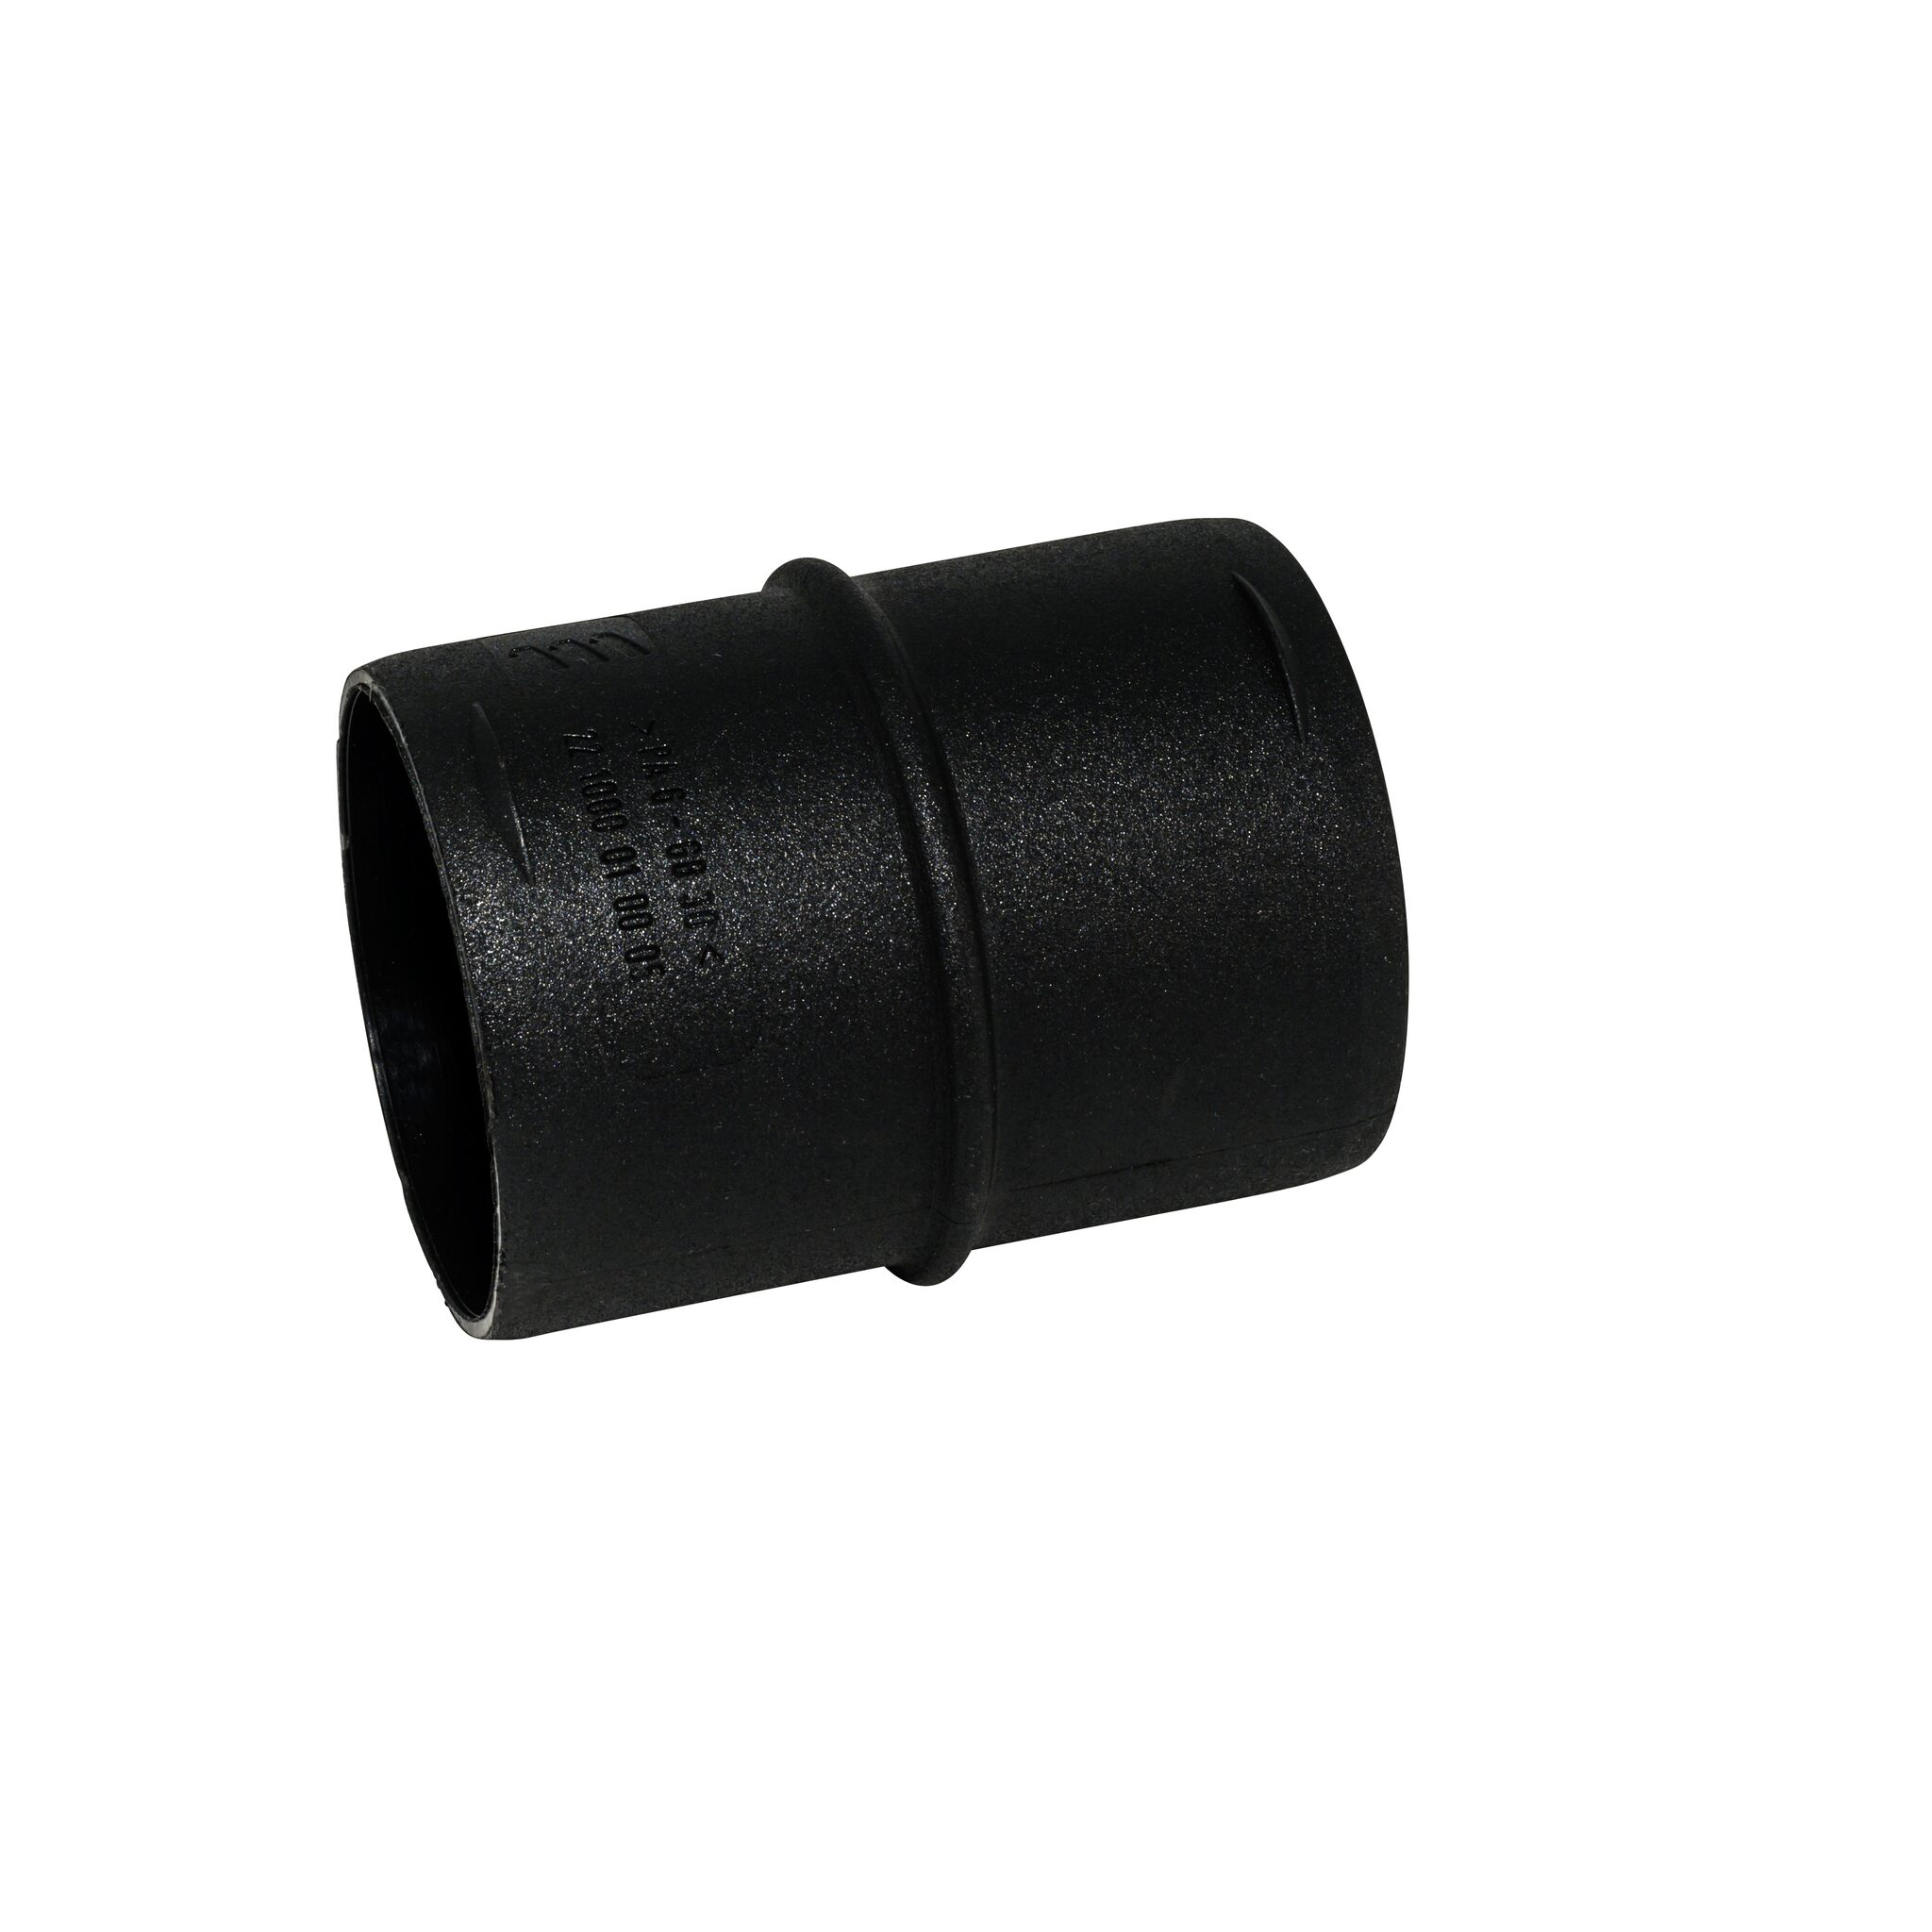 Hot air hose connector for diesel heaters